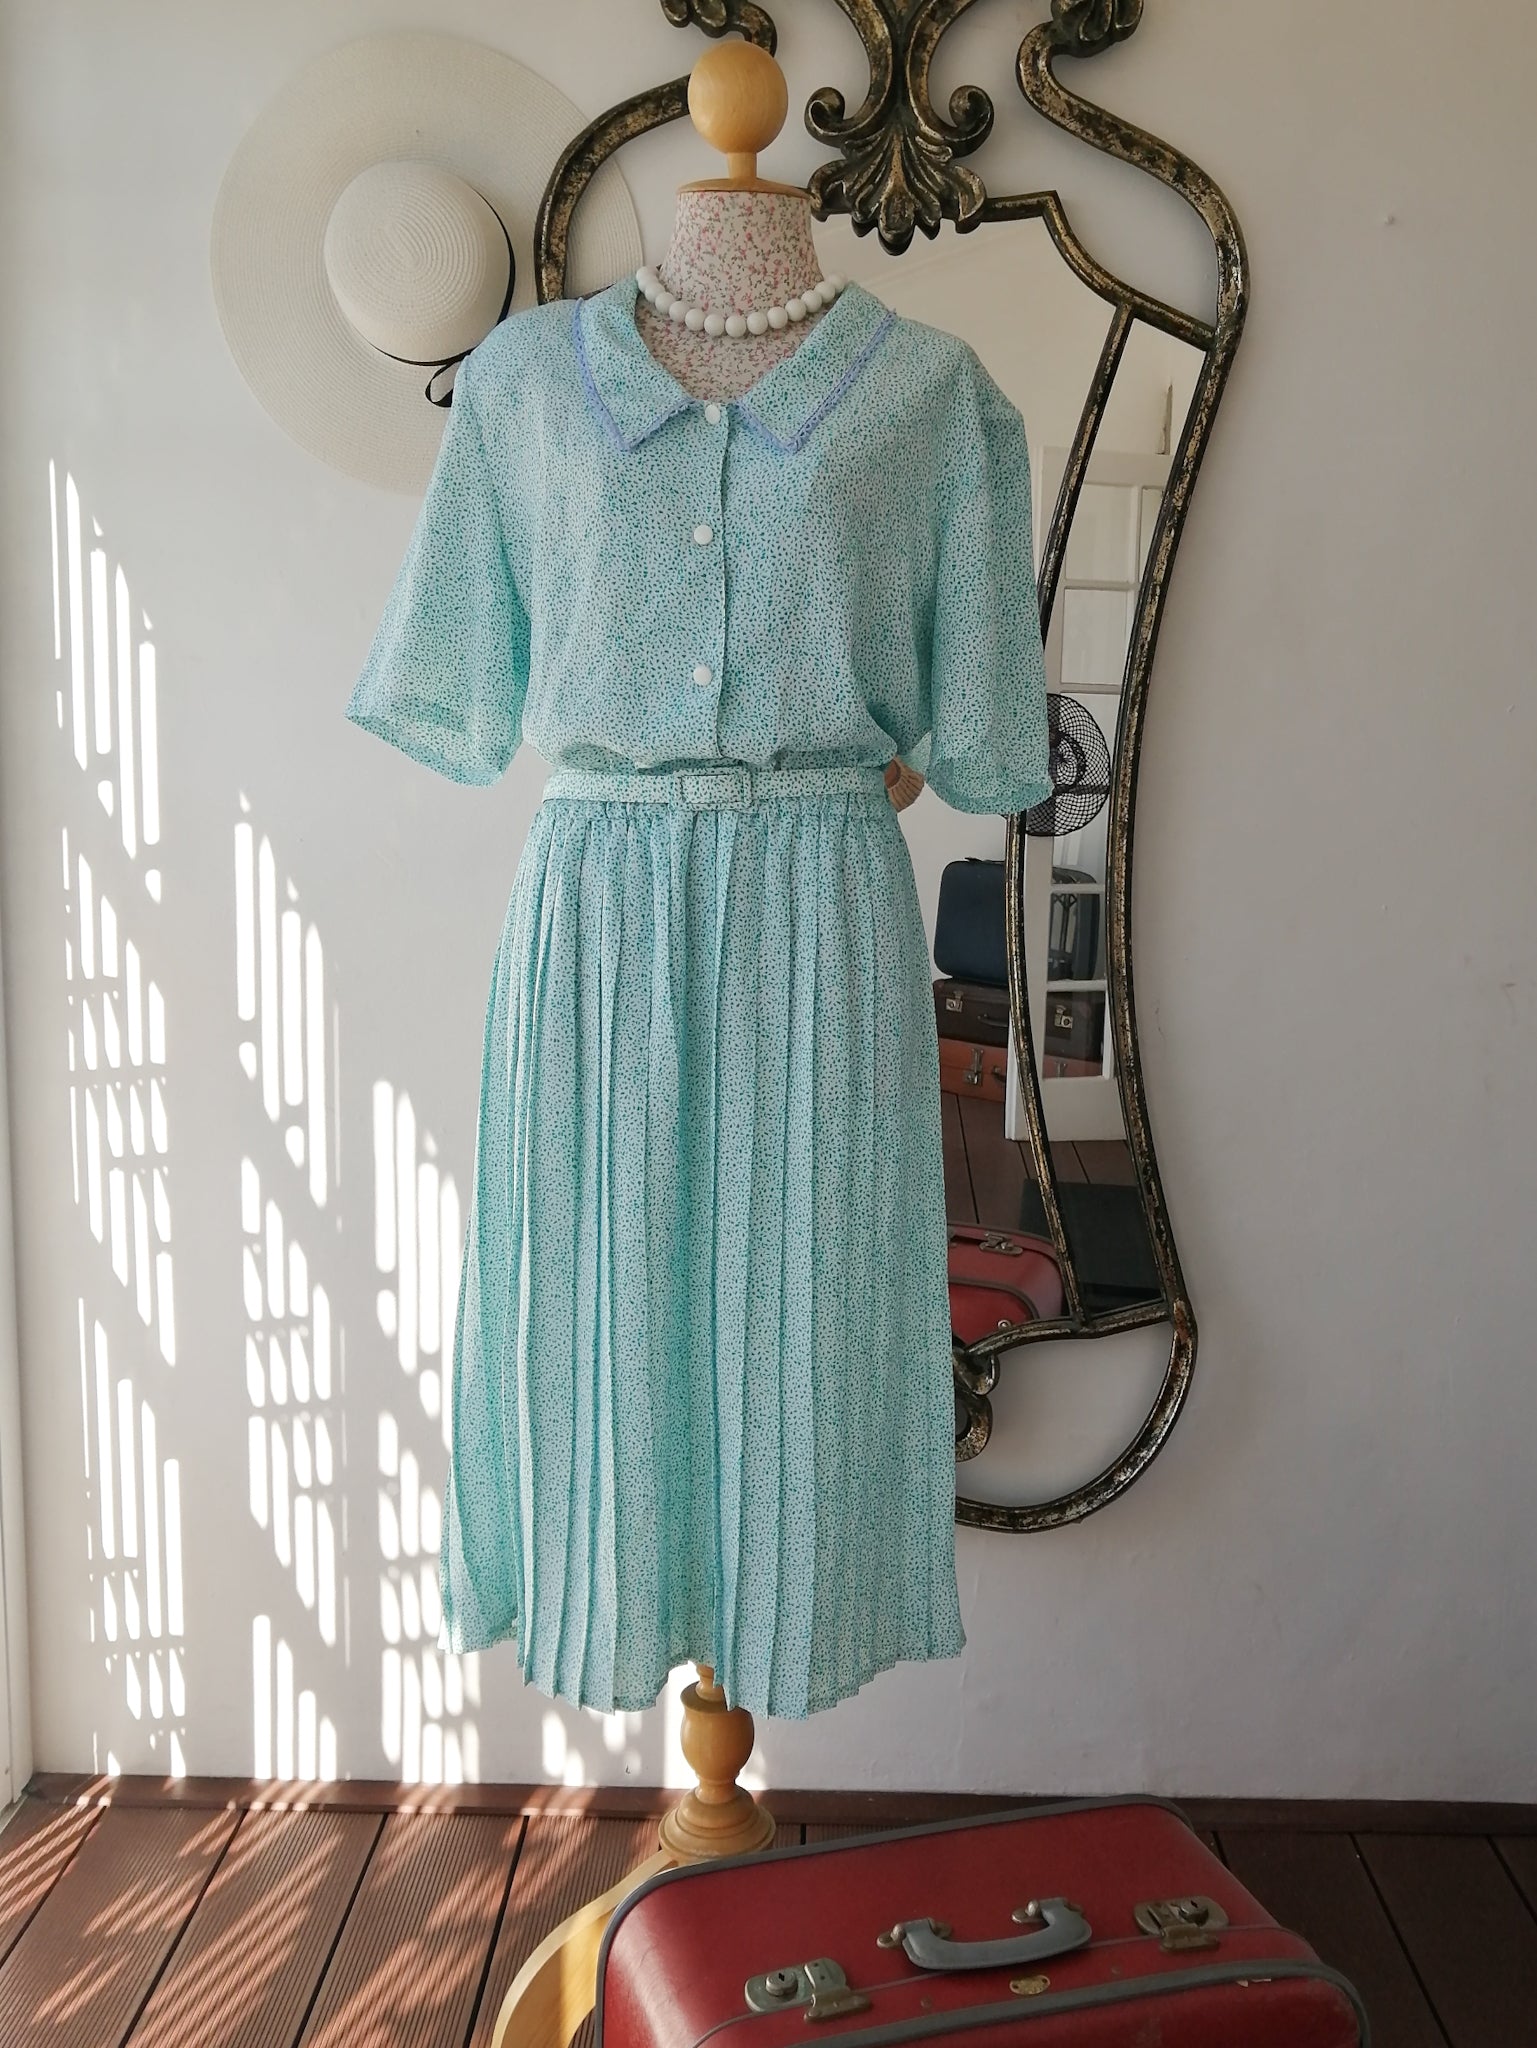 1950's Vintage dress with lace and pleat detail